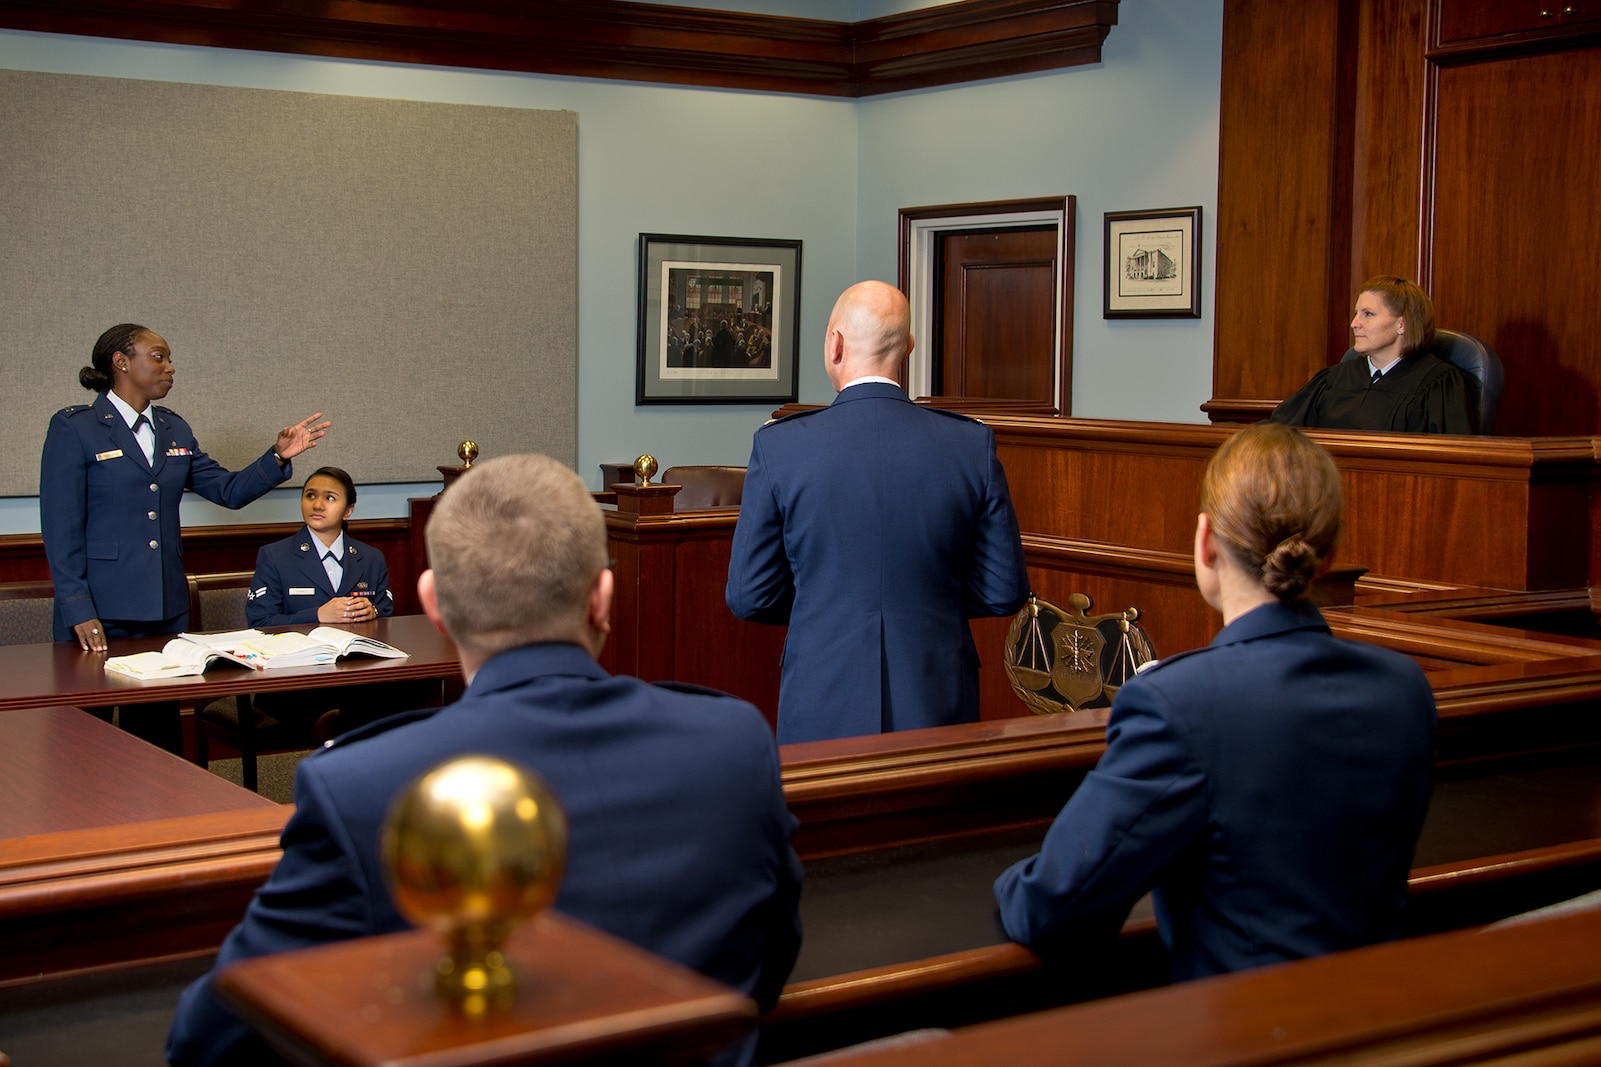 Example of a mock trial courtroom scene.